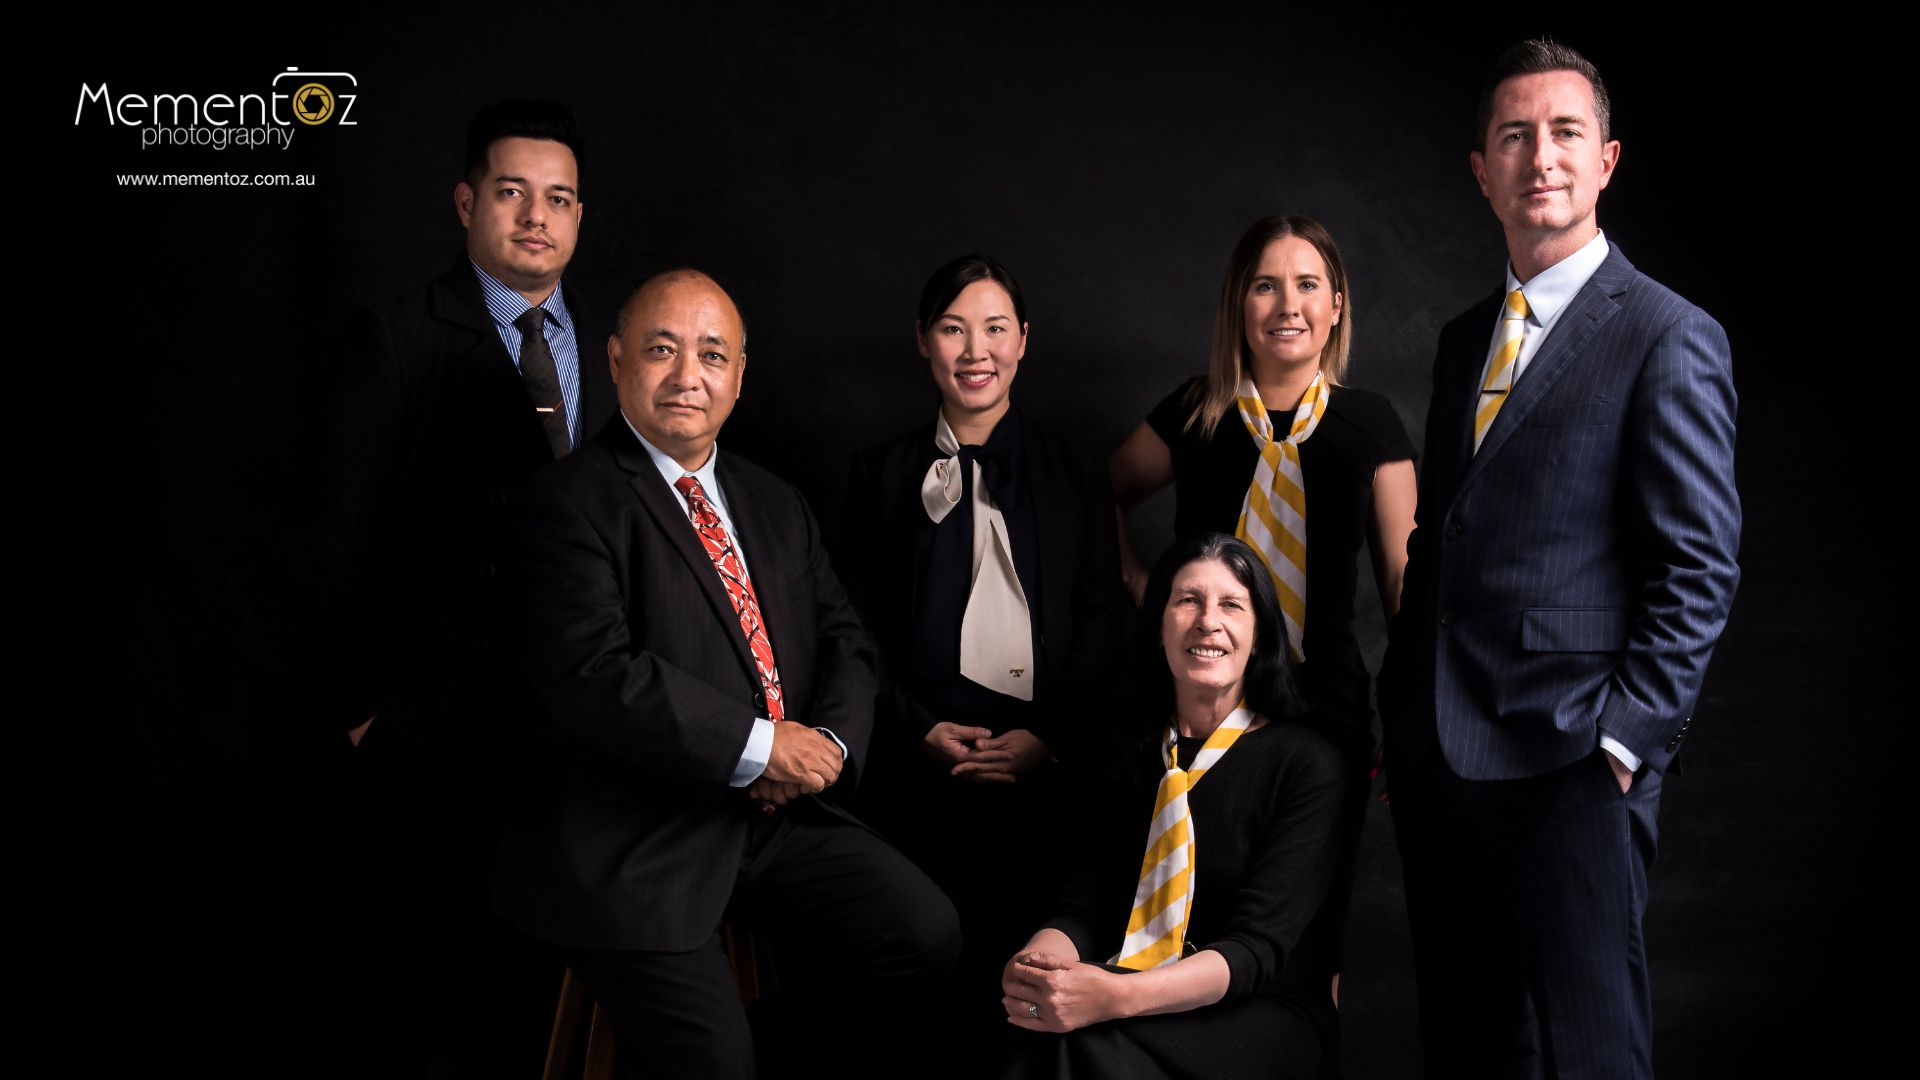 Headshot photograph of Corporate professionals captured by Kapil Mehta an expert Professional photographer from MementOz Photography in Brisbane, Australia